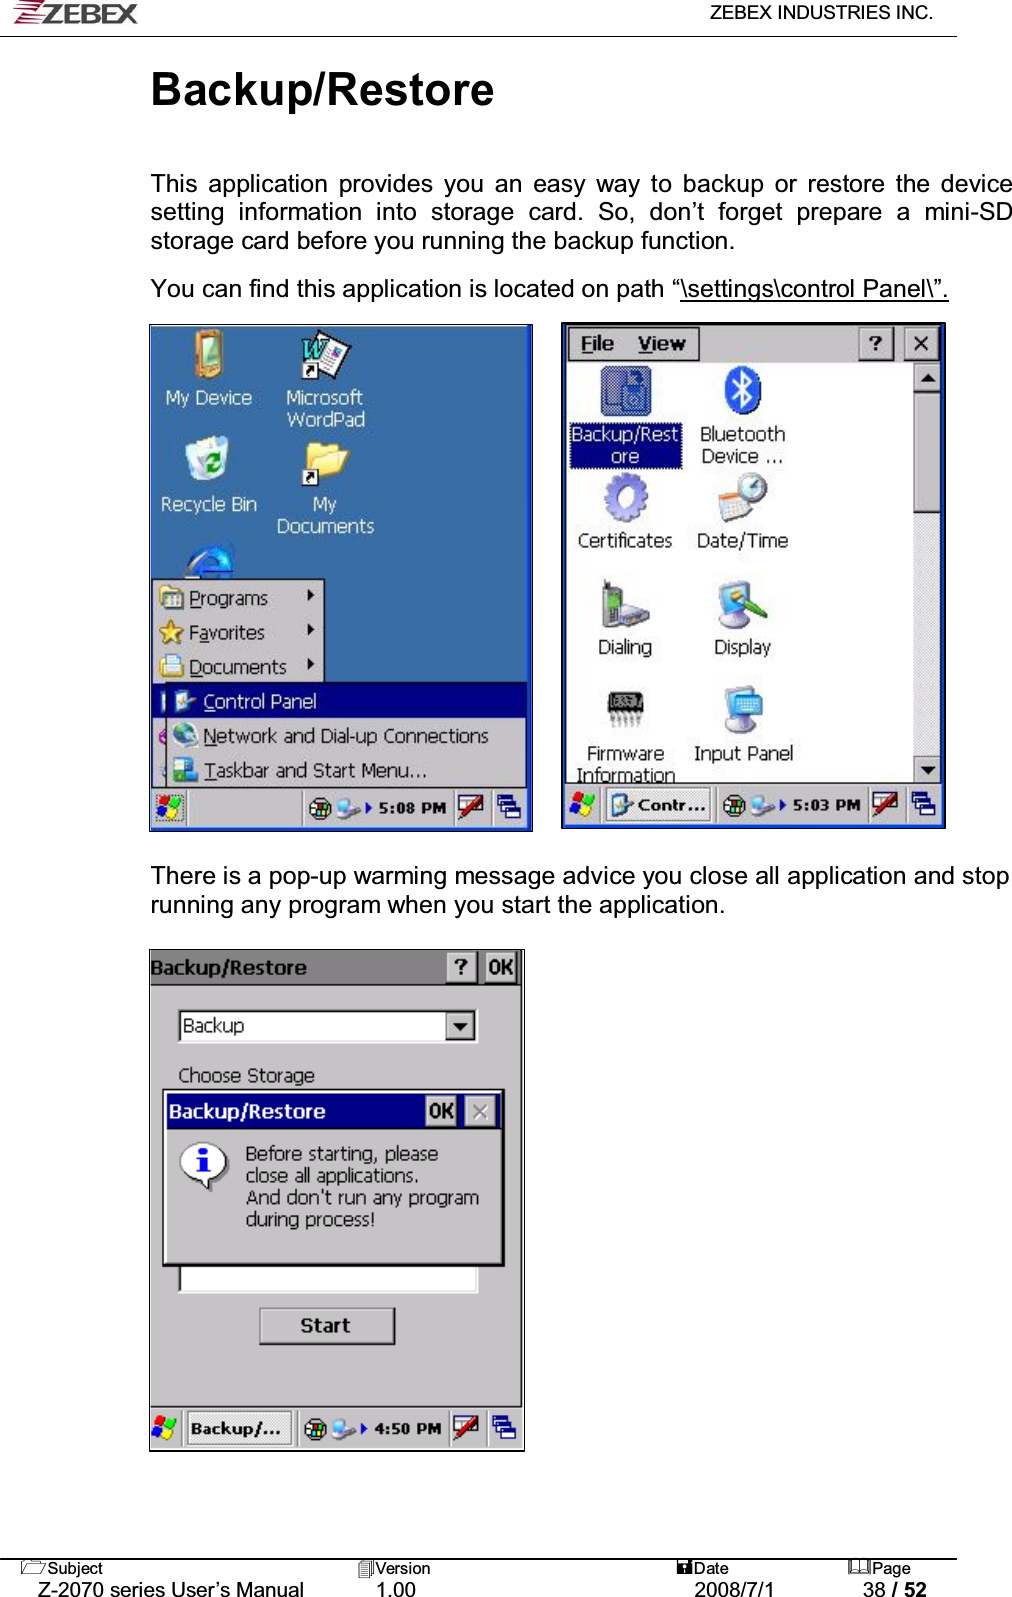   ZEBEX INDUSTRIES INC.   Subject Version  Date Page   Z-2070 series User’s Manual  1.00  2008/7/1  38 / 52 Backup/Restore   This application provides you an easy way to backup or restore the device setting information into storage card. So, don’t forget prepare a mini-SD storage card before you running the backup function.  You can find this application is located on path “\settings\control Panel\”.                     There is a pop-up warming message advice you close all application and stop running any program when you start the application.                  